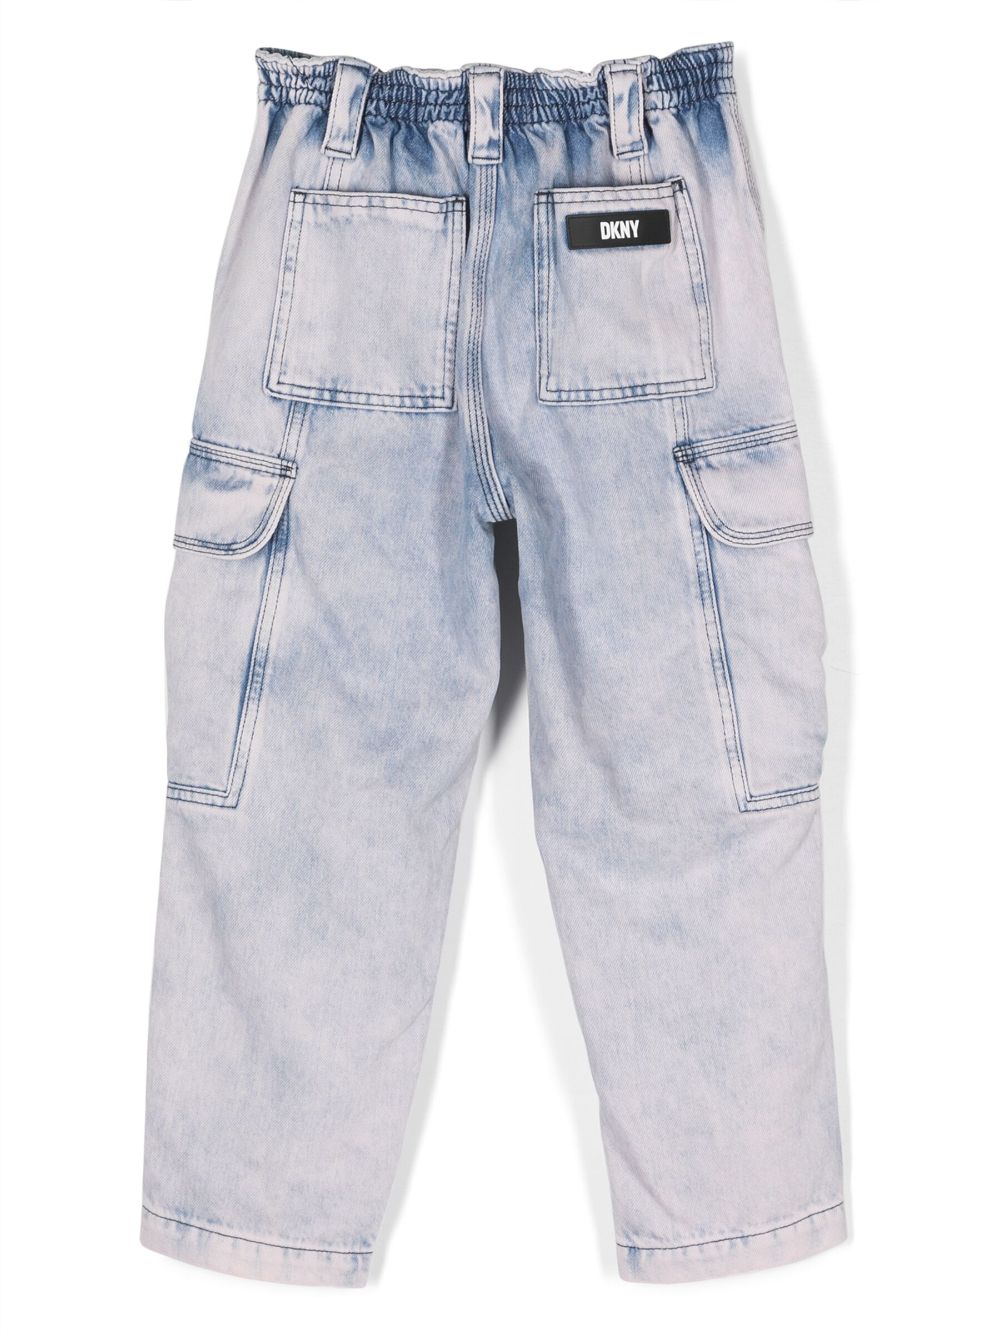 Dkny Kids tapered jeans